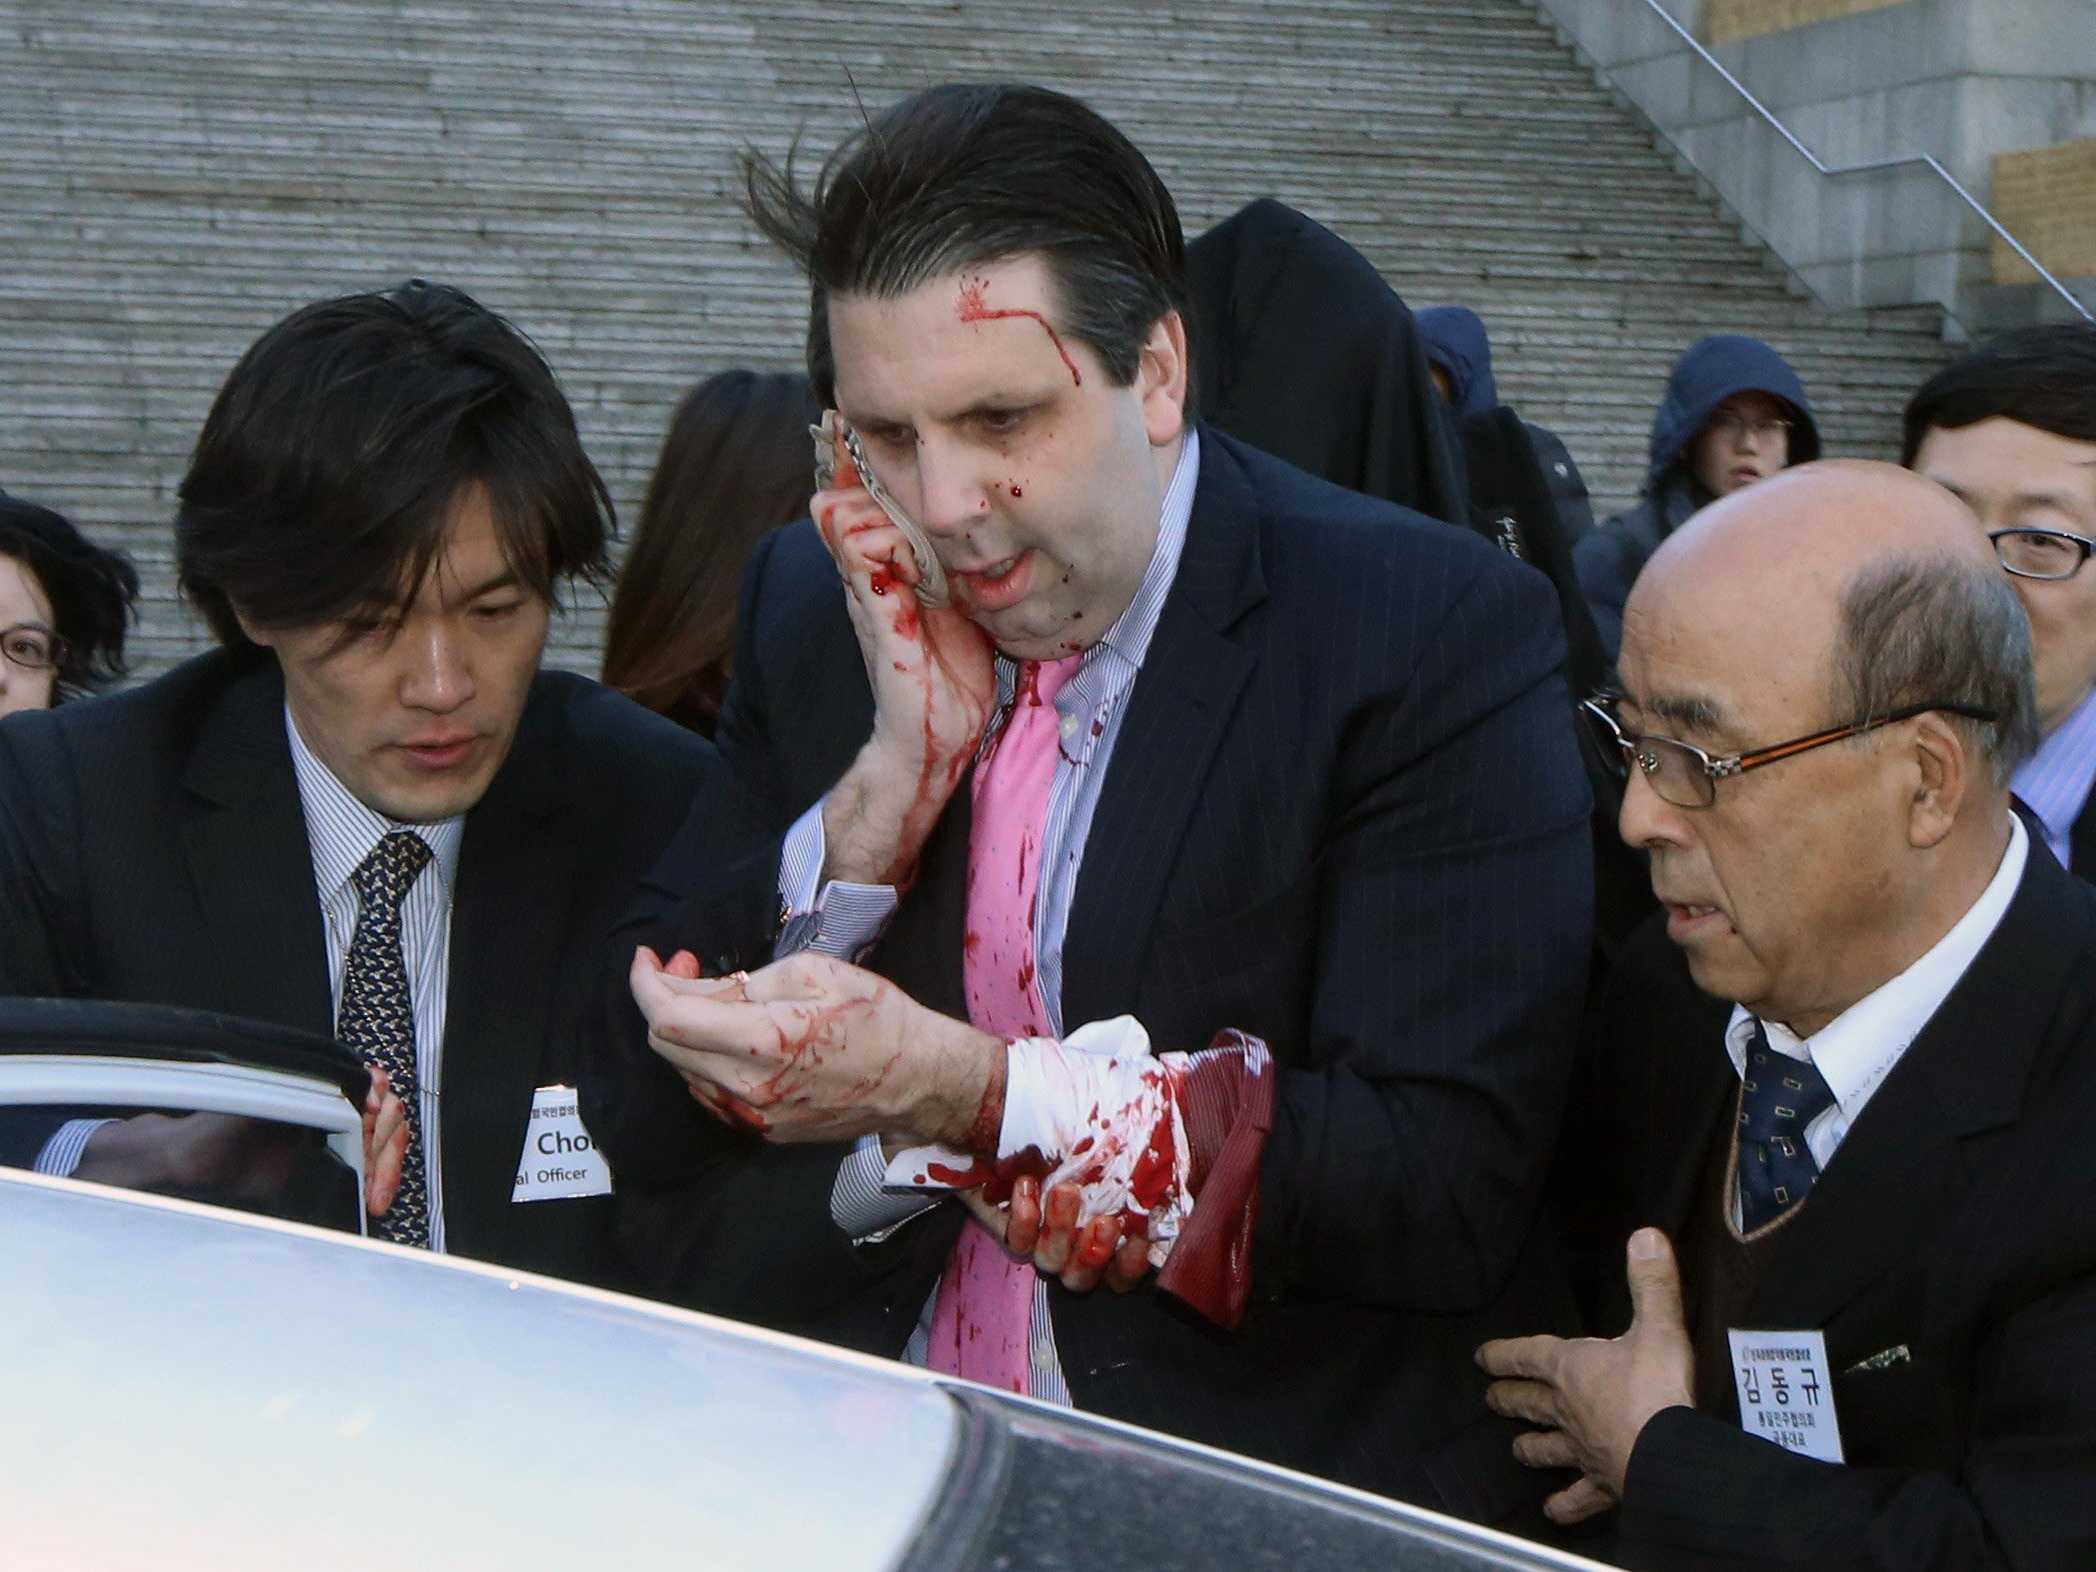 N. Korea Rejects Links to US Envoy Attacker
